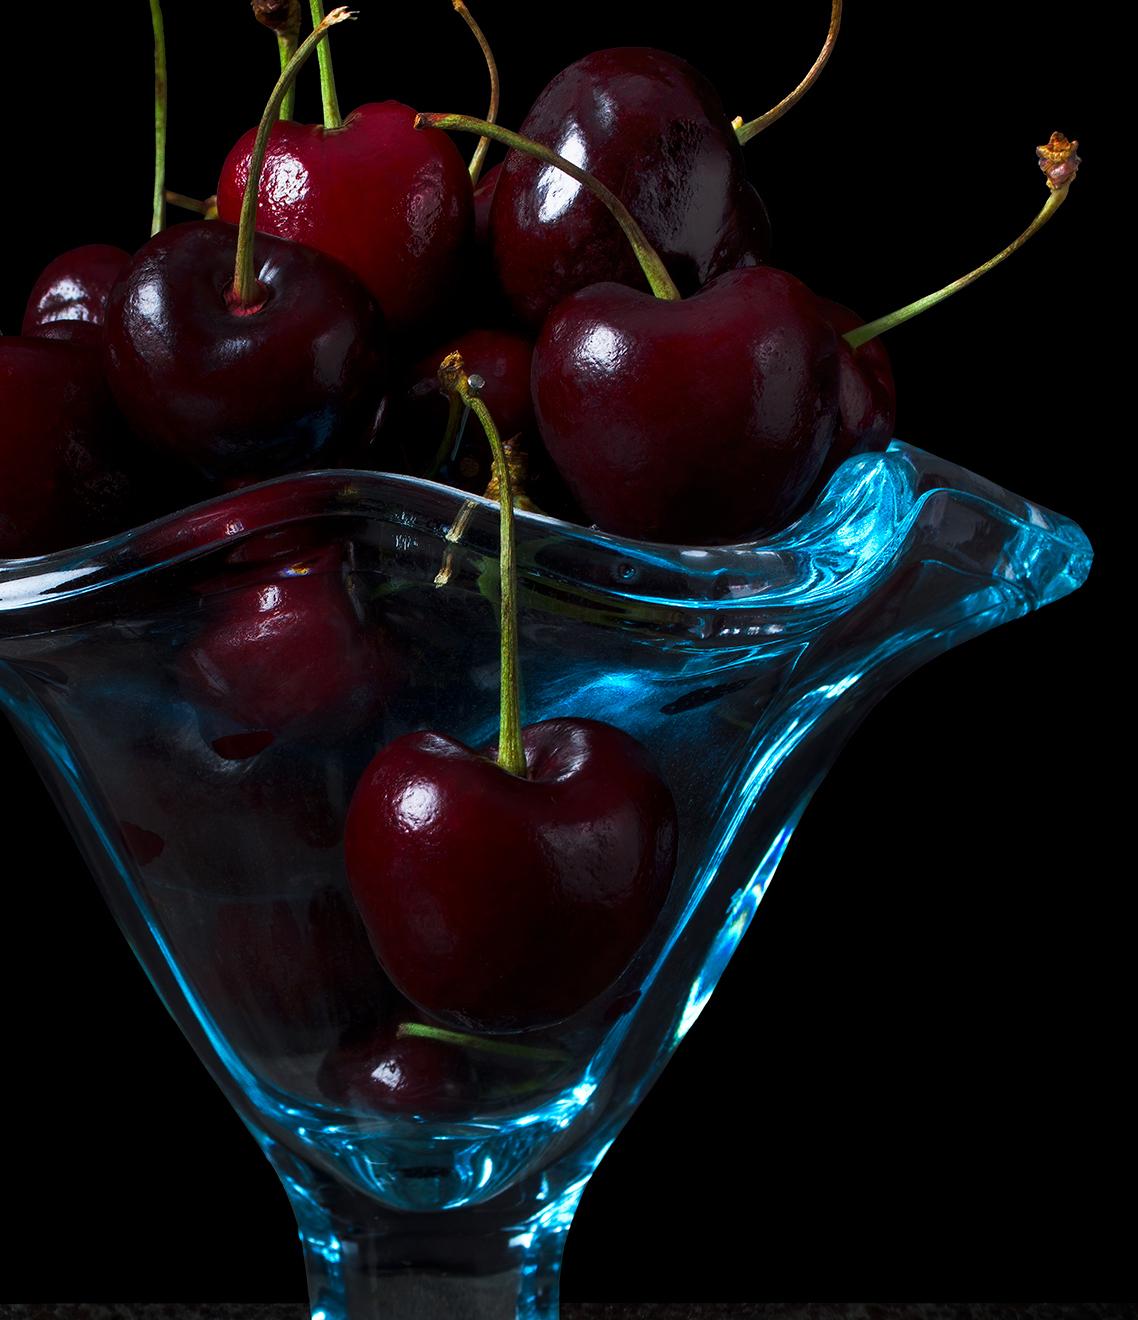 Cerezas. From The Bodegones still life color photography  series - Contemporary Photograph by Dora Franco